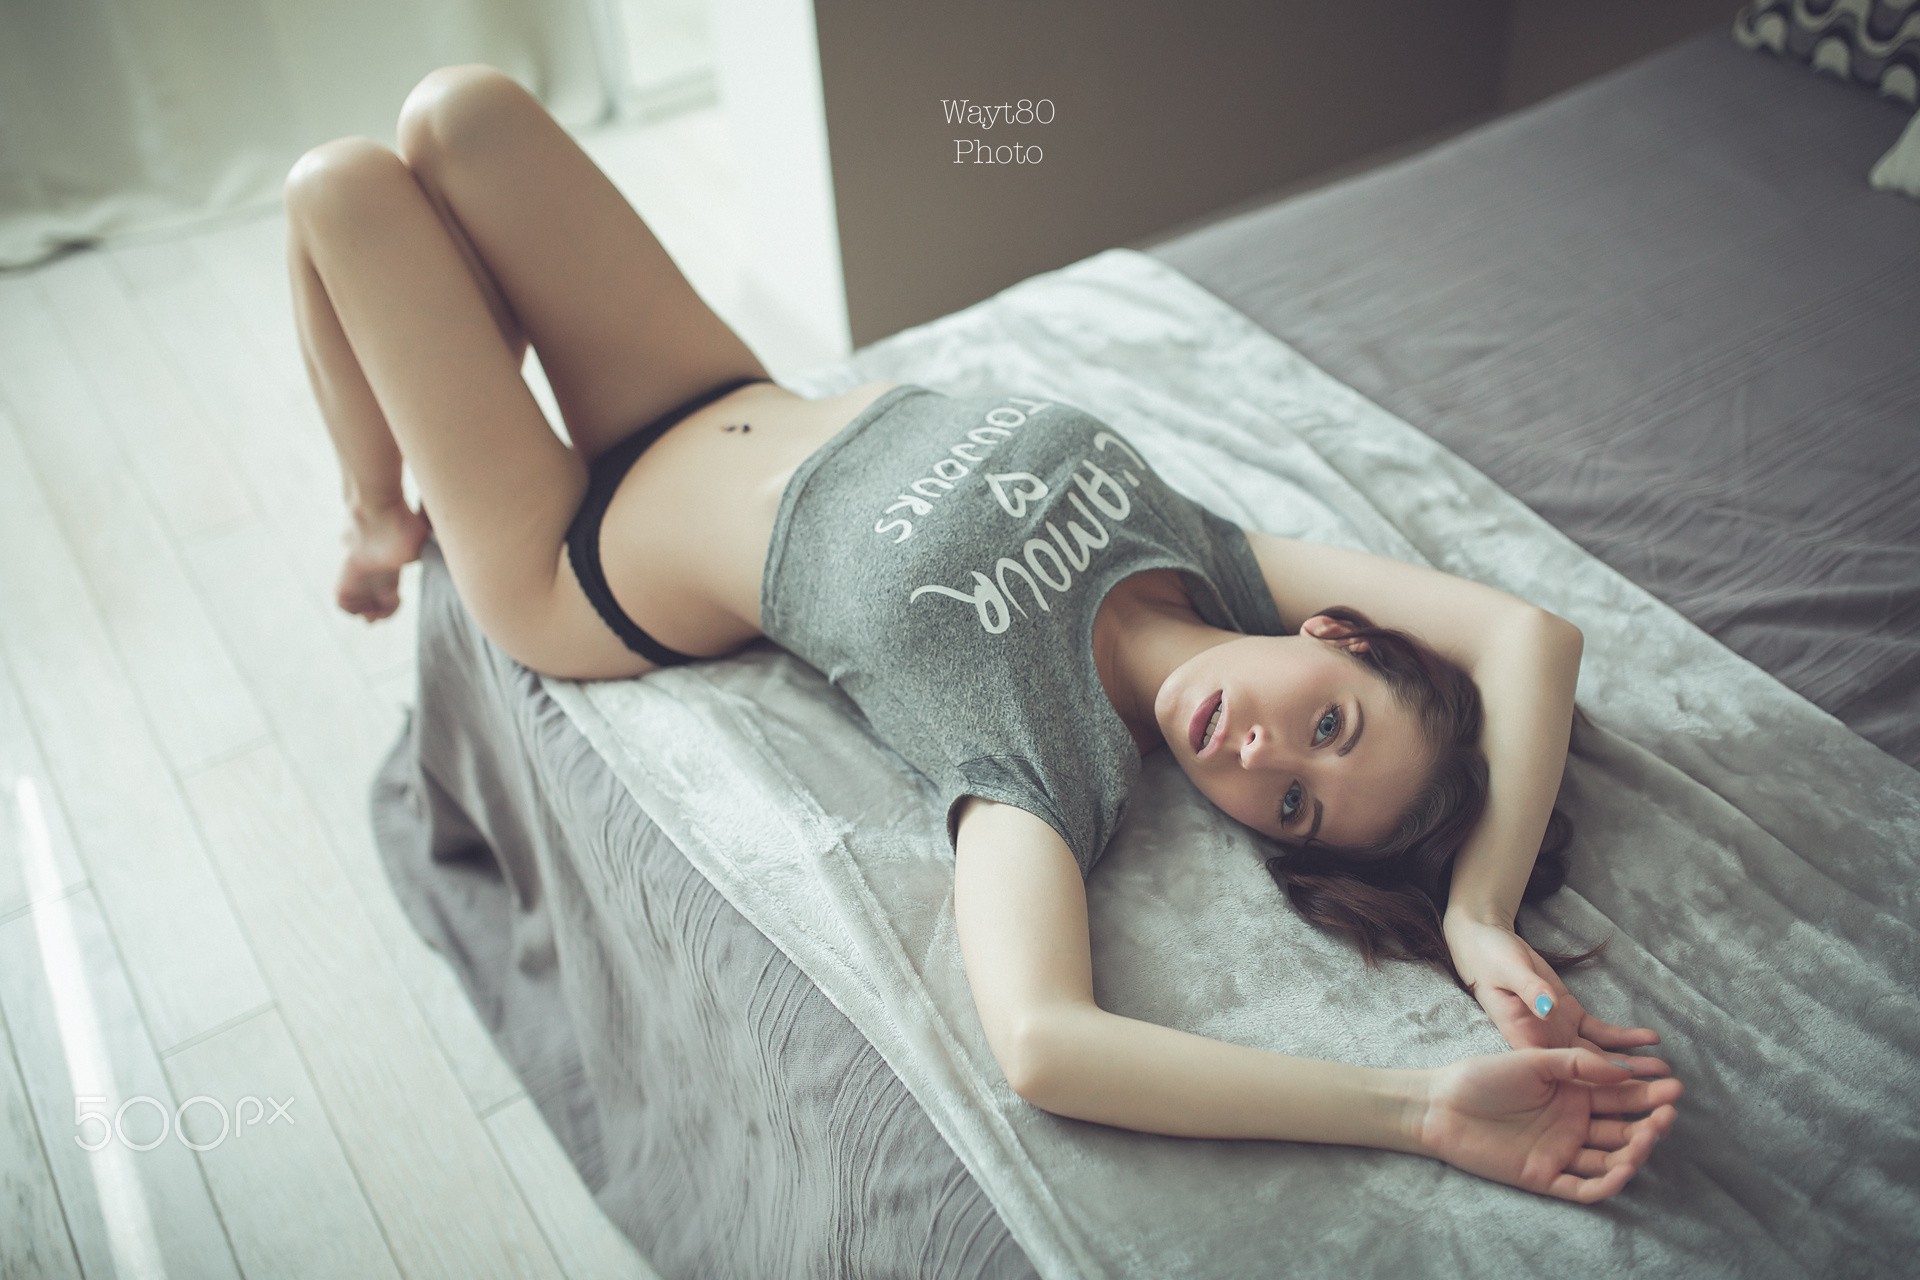 People 1920x1280 women in bed panties T-shirt looking at viewer pierced navel 500px high angle Wayt80 Photo black panties lying on back knees together belly black underwear printed shirts women indoors bent legs watermarked arms up bare midriff barefoot painted nails